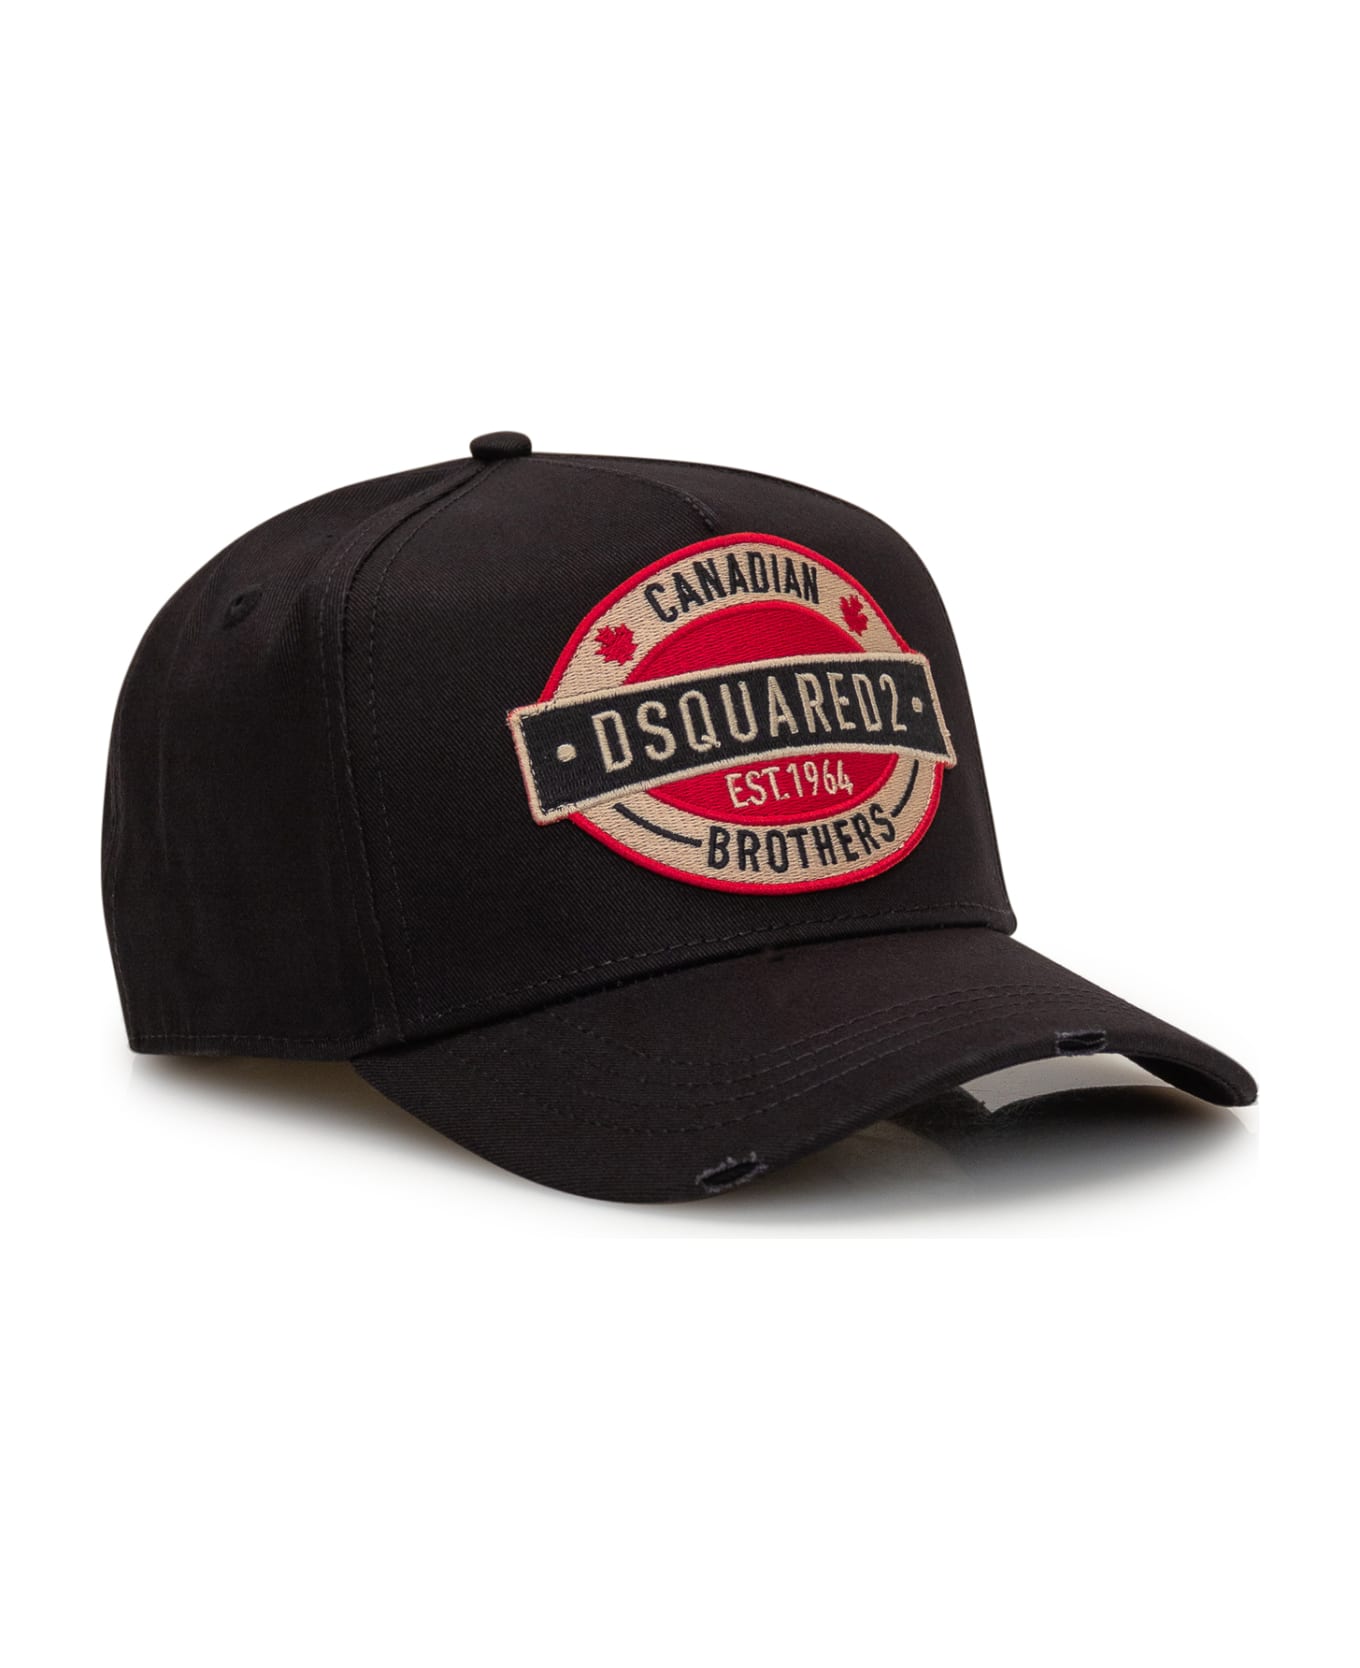 Dsquared2 Black Baseball Cap With Logo Patch - Black